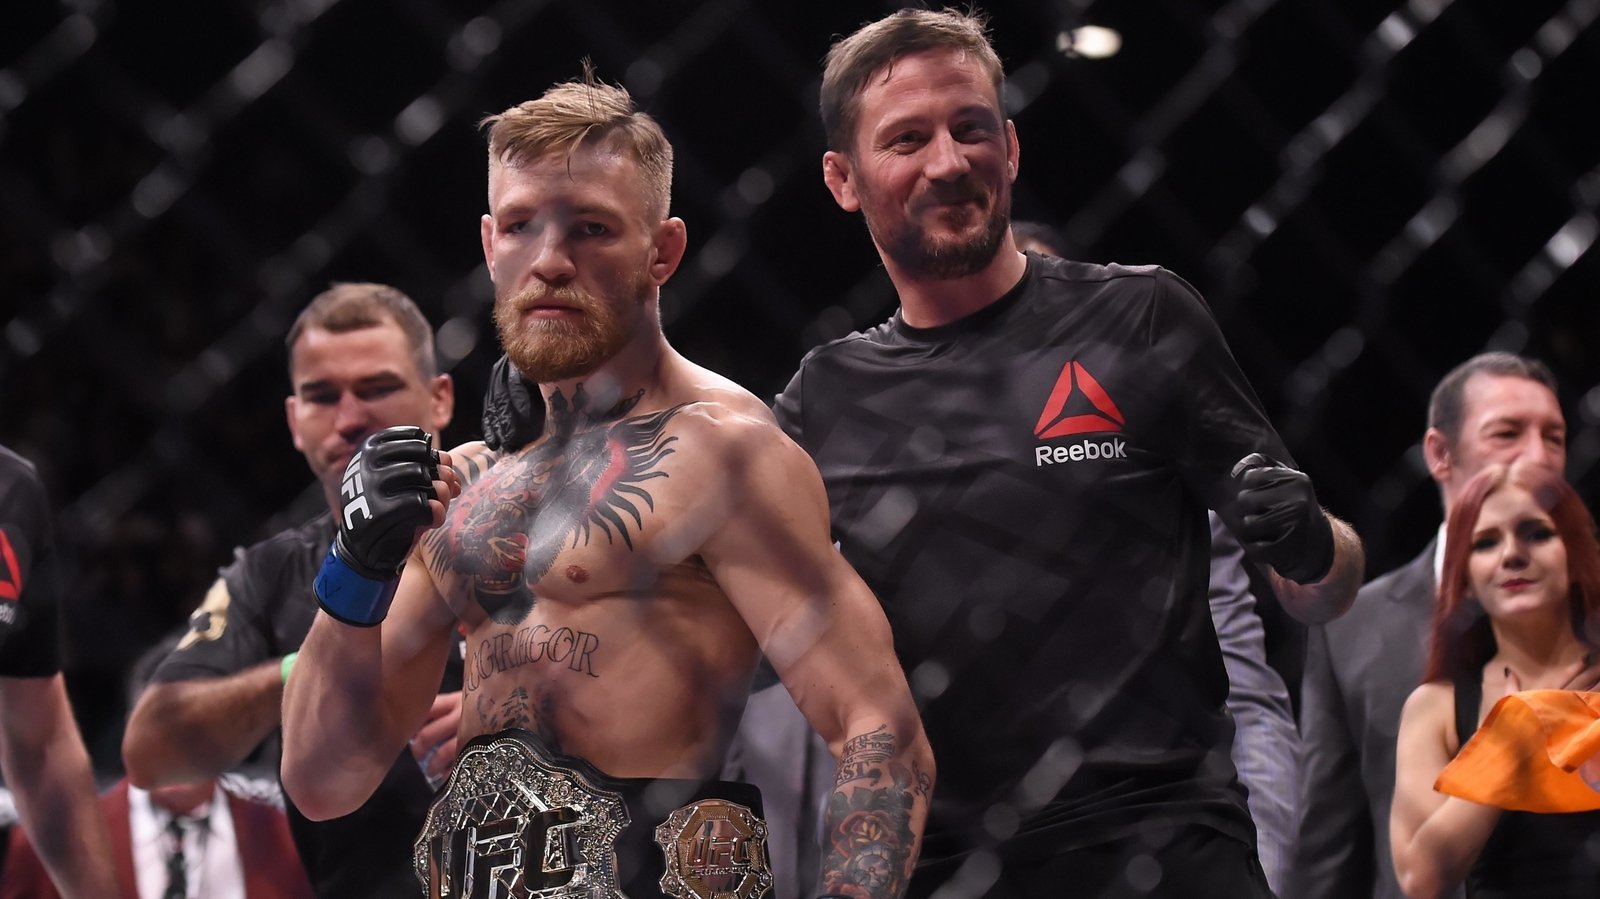 Coach Kavanagh expects Conor McGregor to fight again